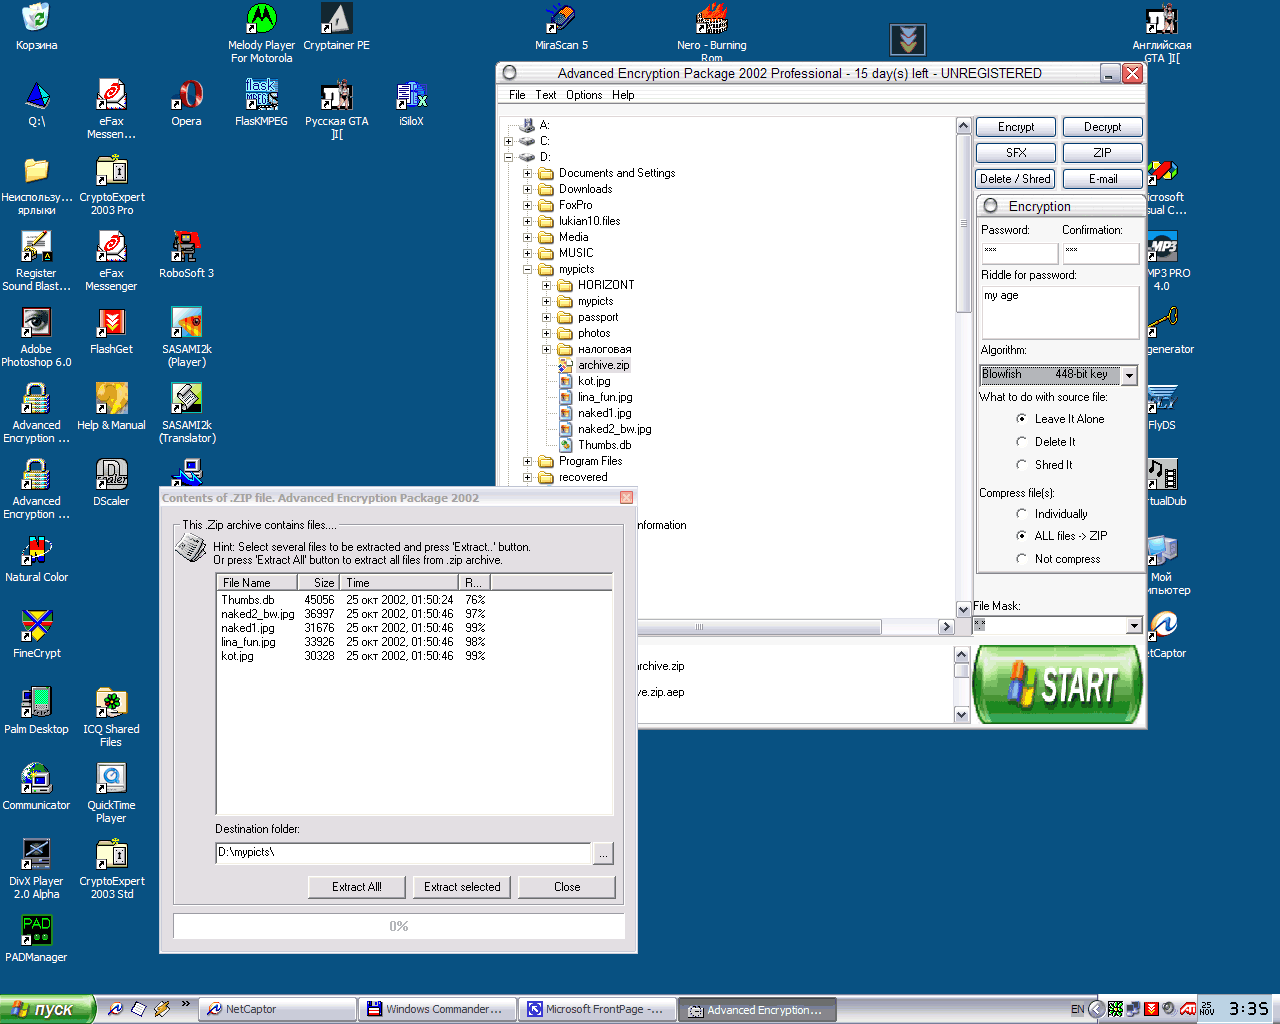 Advanced Encryption Package 2004